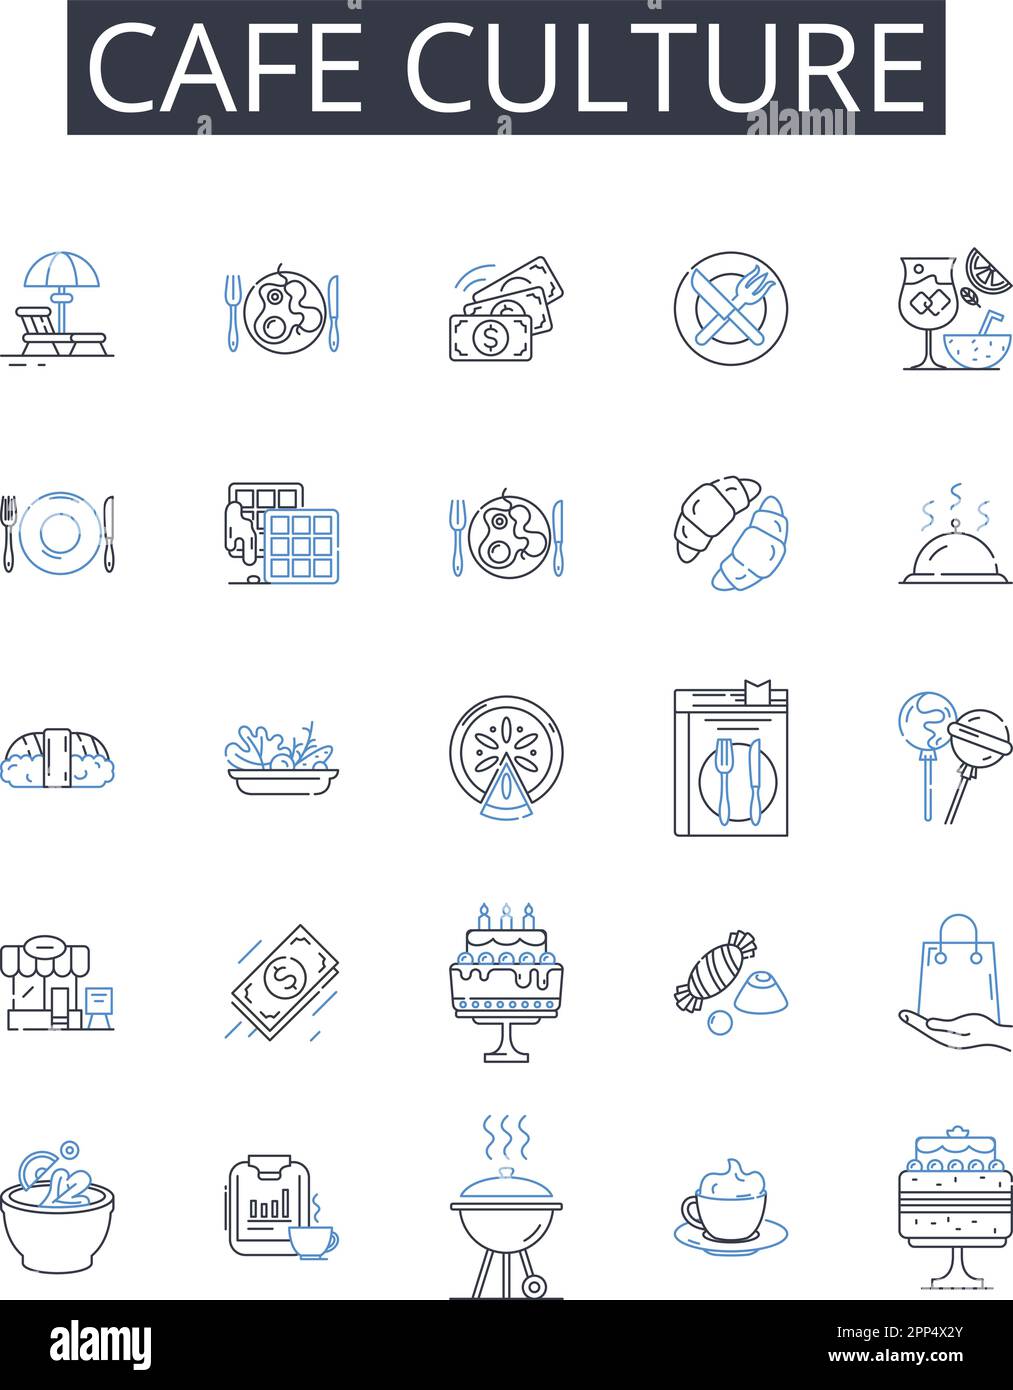 Cafe culture line icons collection. Food scene, Urban style, Street fashion, Music culture, Art community, Nightlife scene, Beach culture vector and Stock Vector